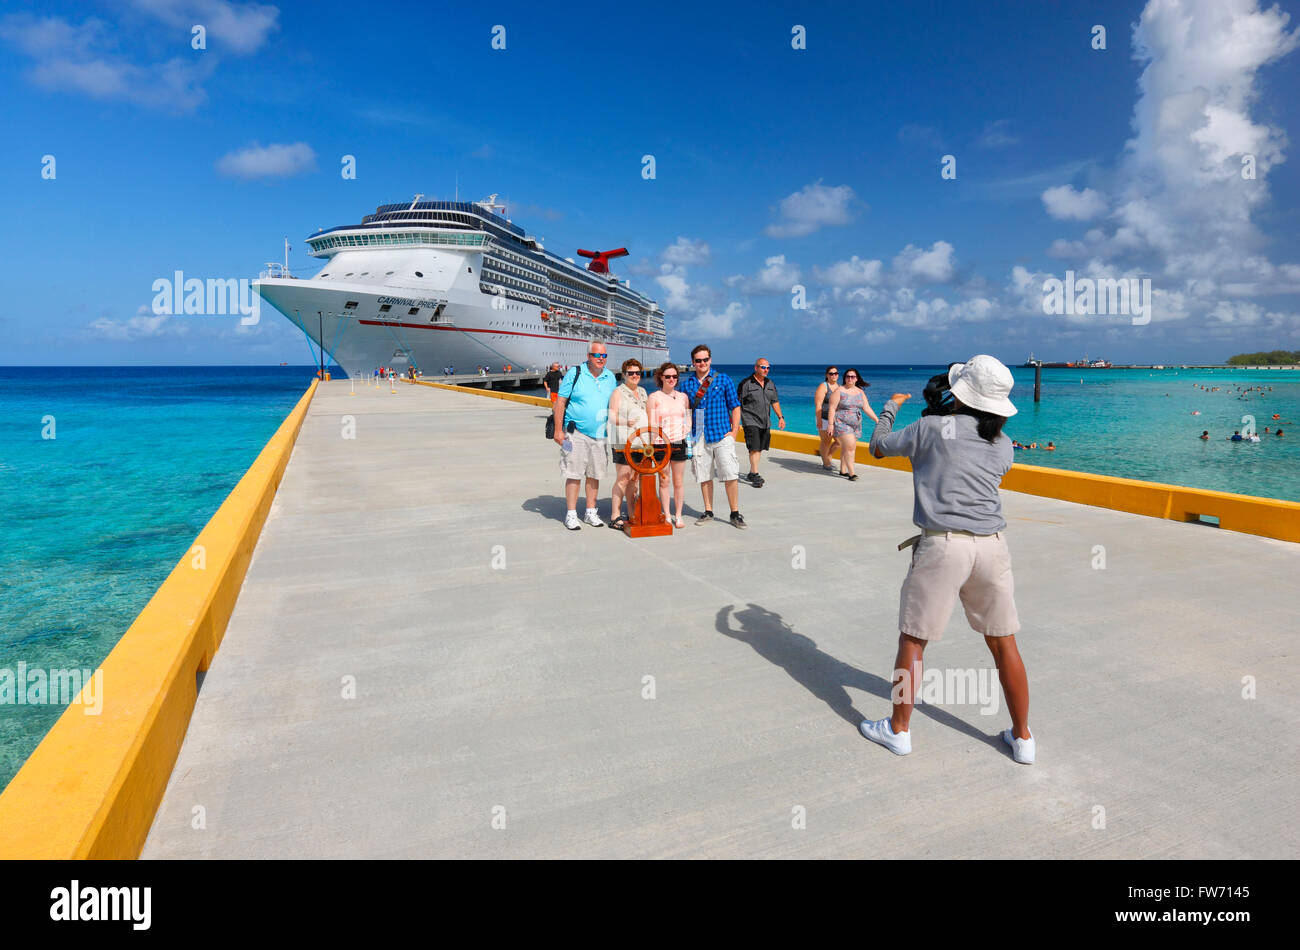 Photographer take photo of tourists on cruise line port in Grand Turk Turks and Caicos Islands, Bahamas Stock Photo